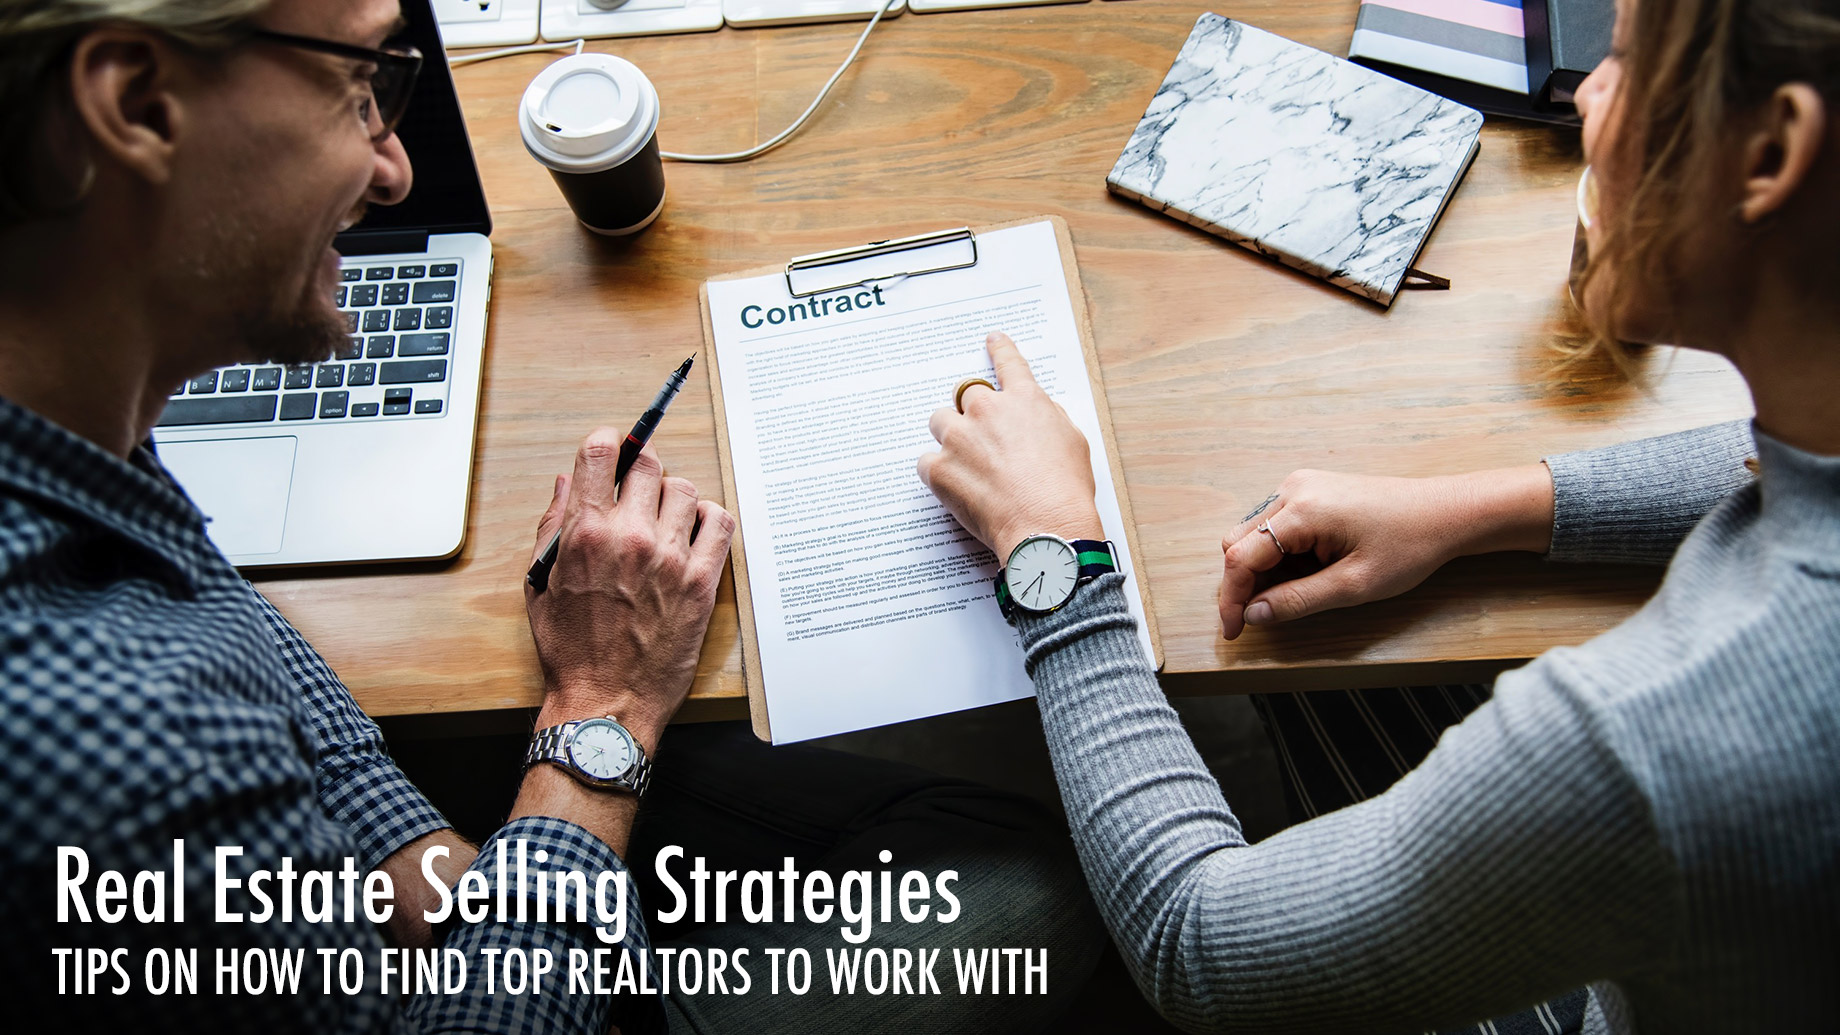 Real Estate Selling Strategies - Tips On How To Find Top Realtors To Work With